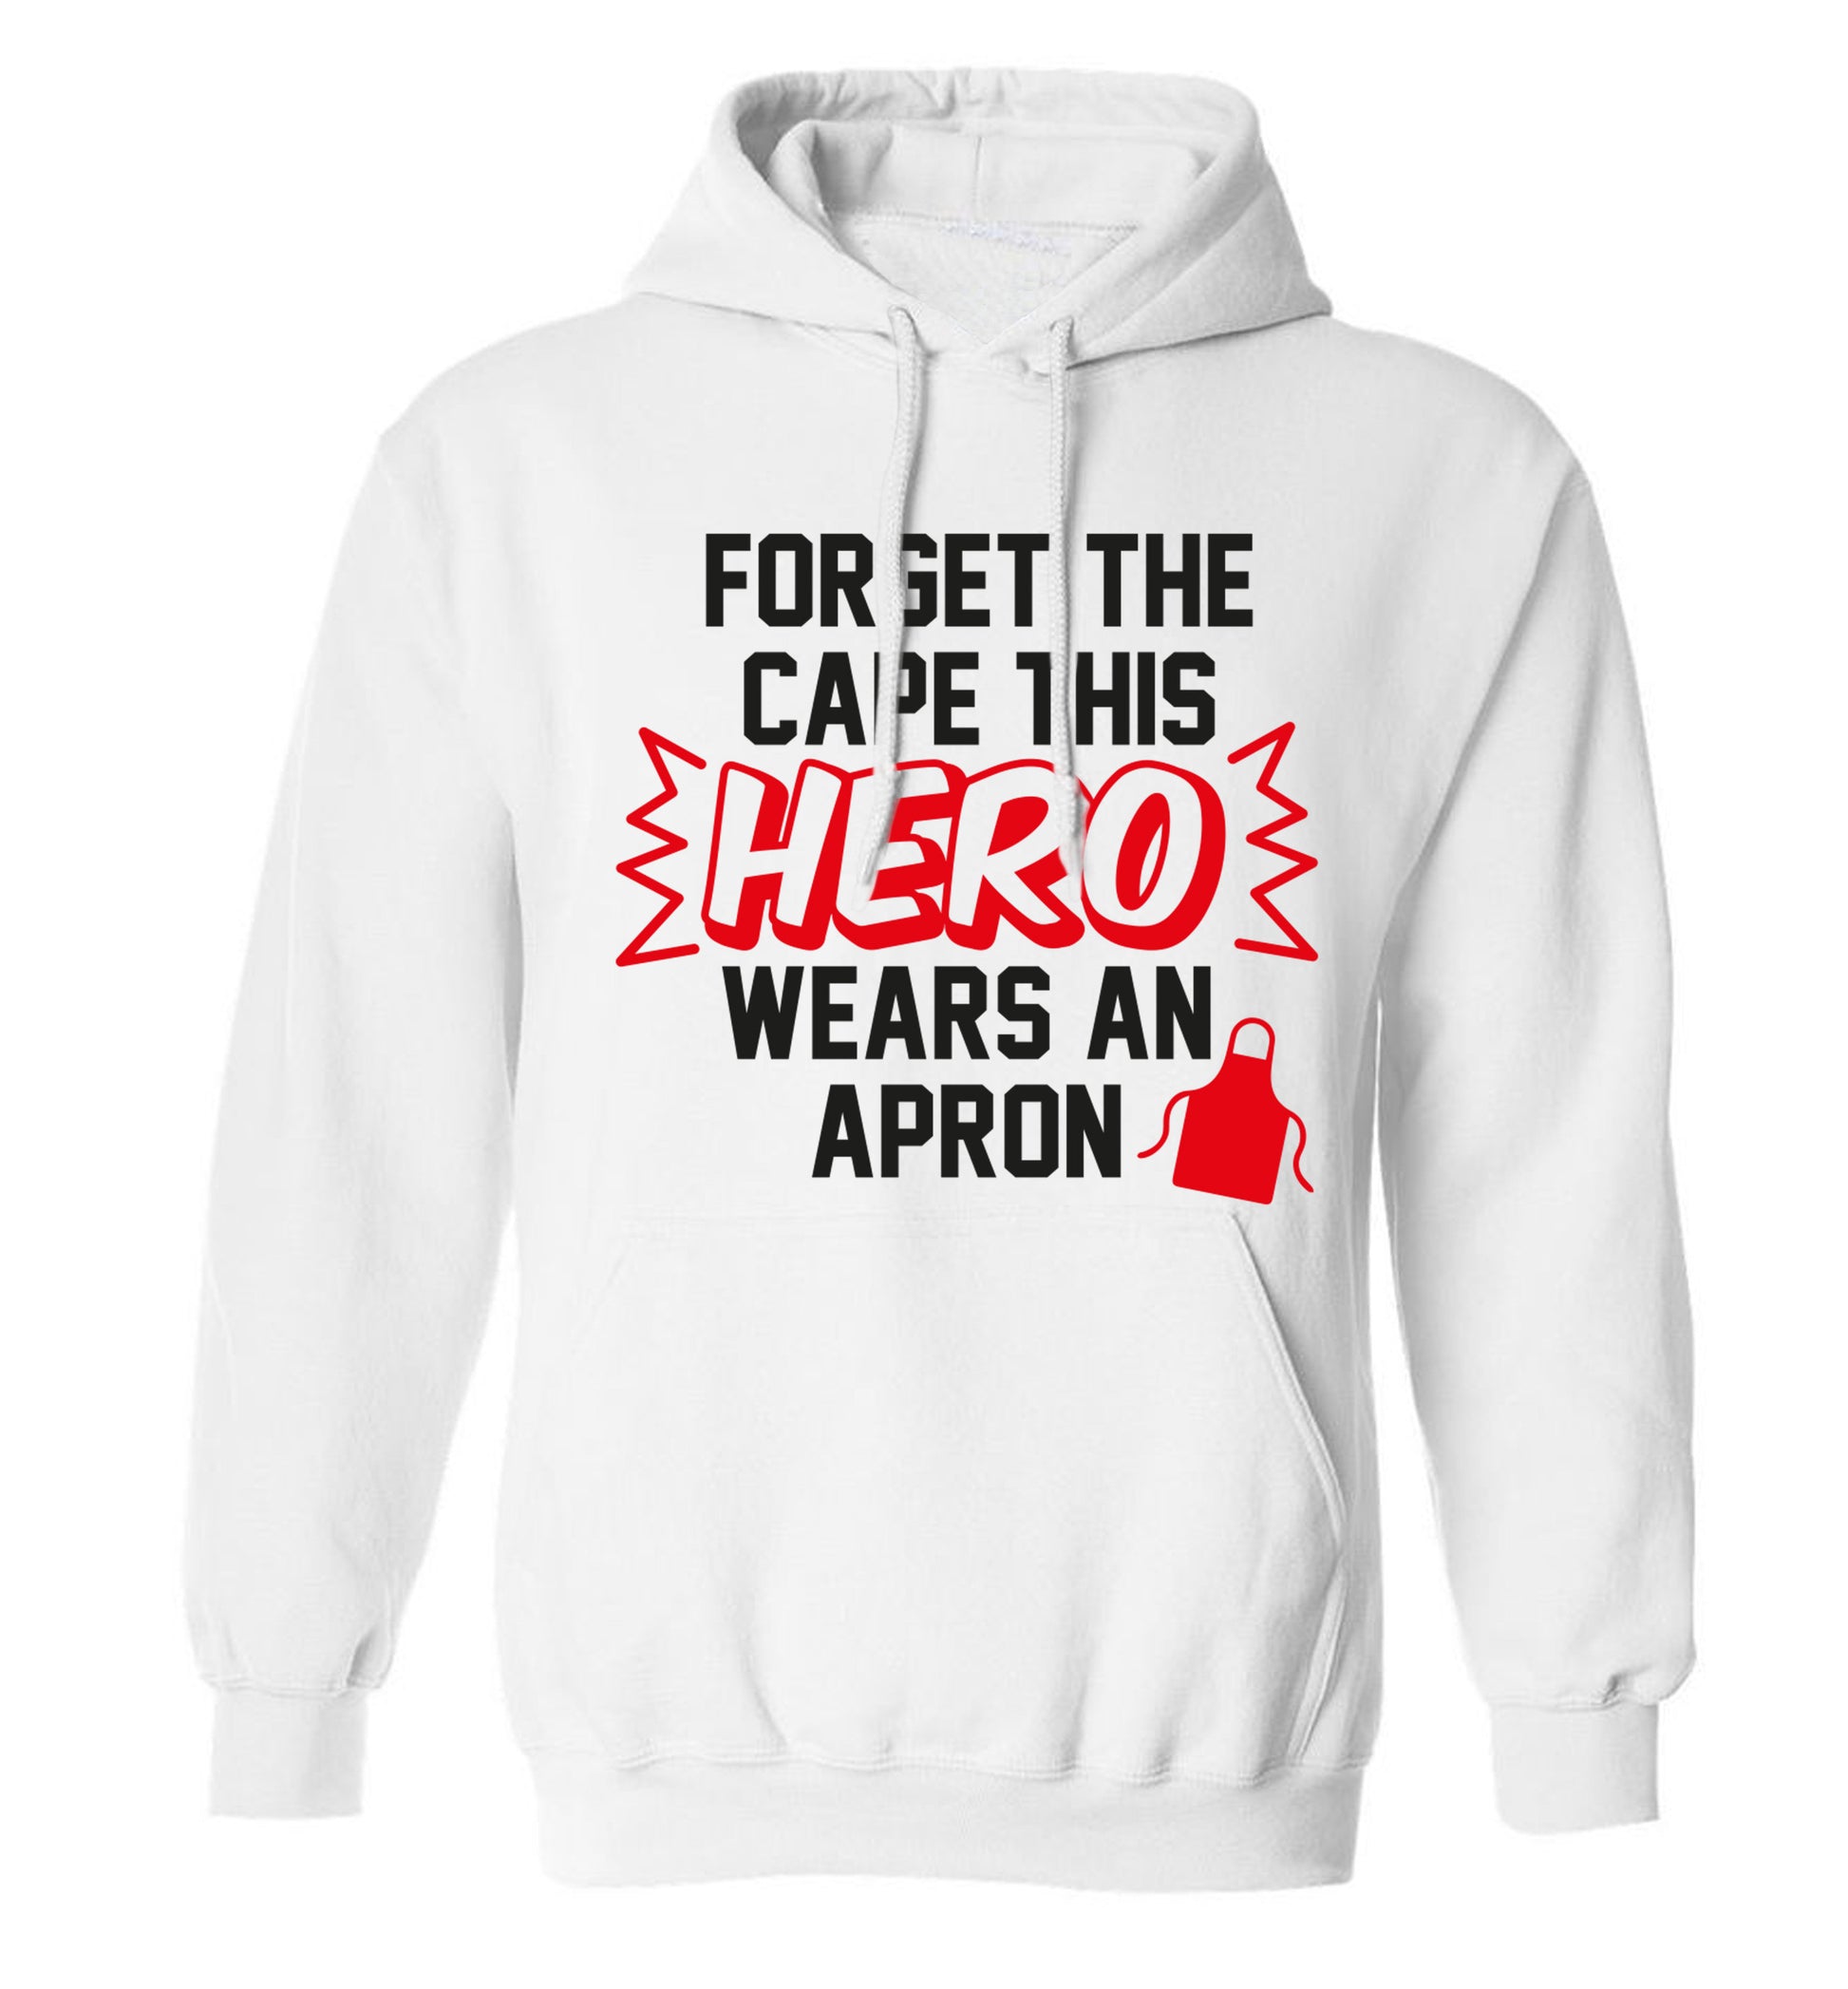 Forget the cape this hero wears an apron adults unisex white hoodie 2XL